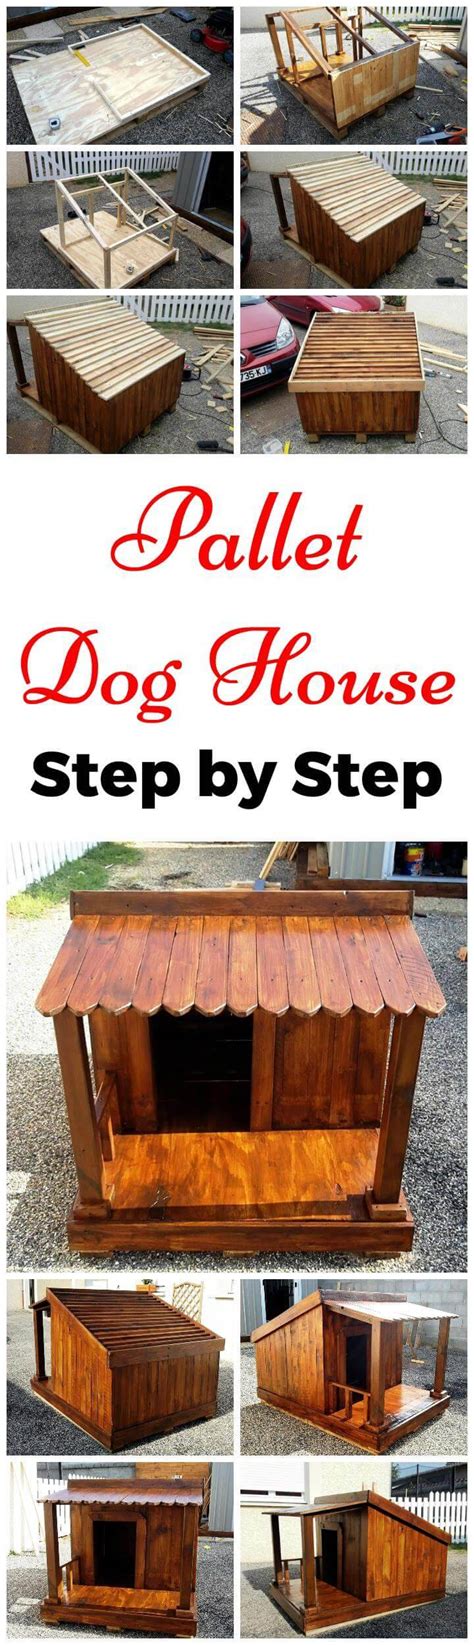 dog house  pallets pictures top   dog house ideas